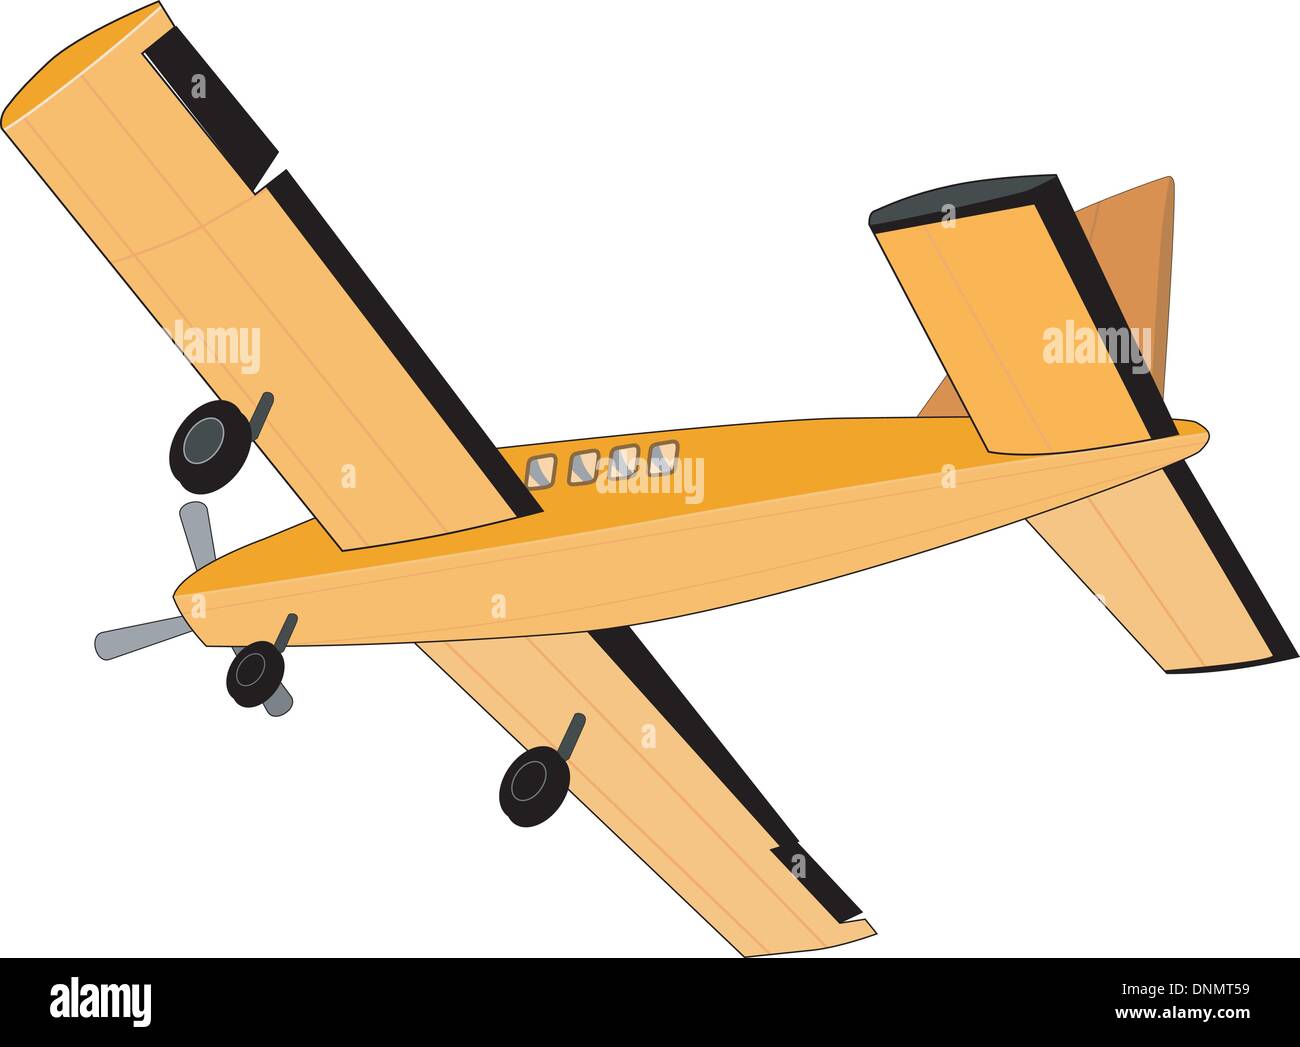 Illustration of a cessna propeller airplane airliner on flight flying  isolated background Stock Vector